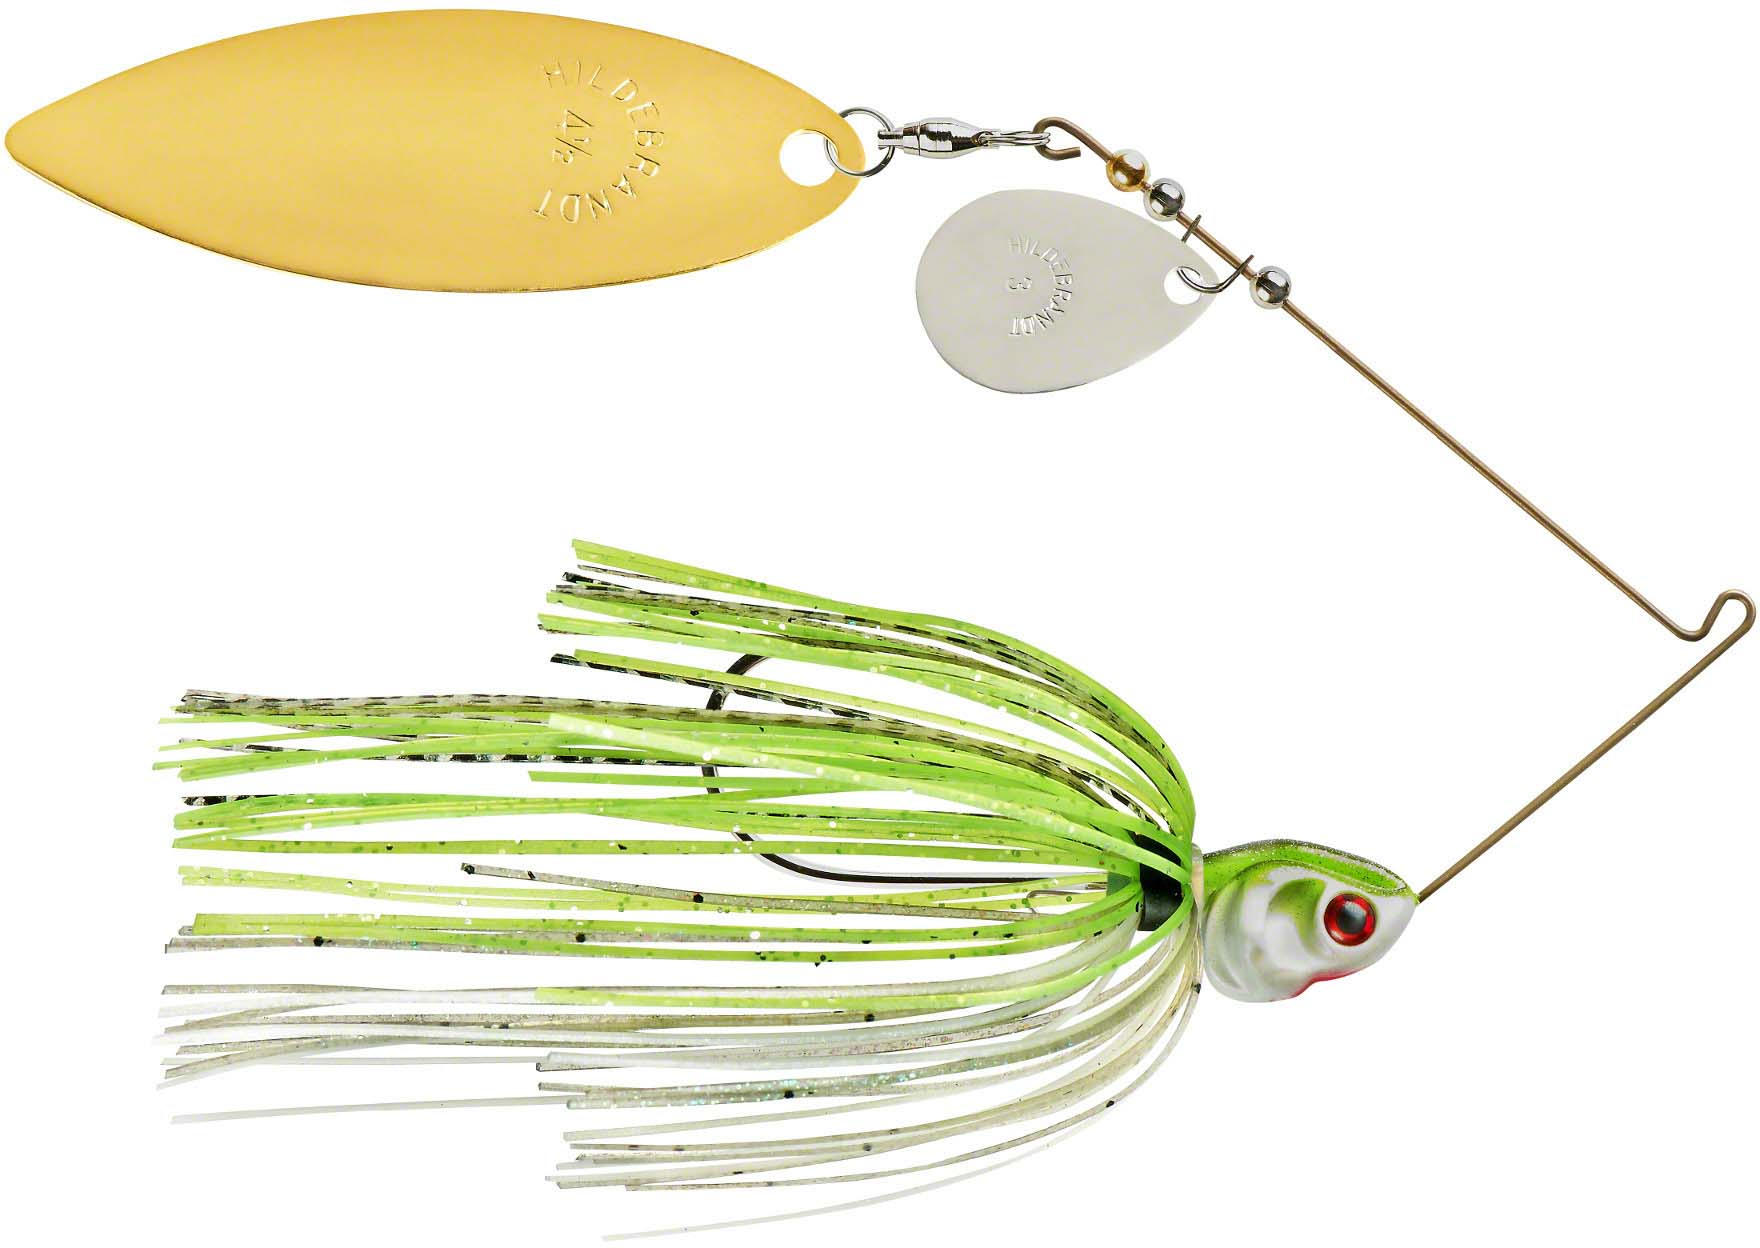 White Spinnerbait - Smooth Nickel Indiana and Gold Colorado Blades